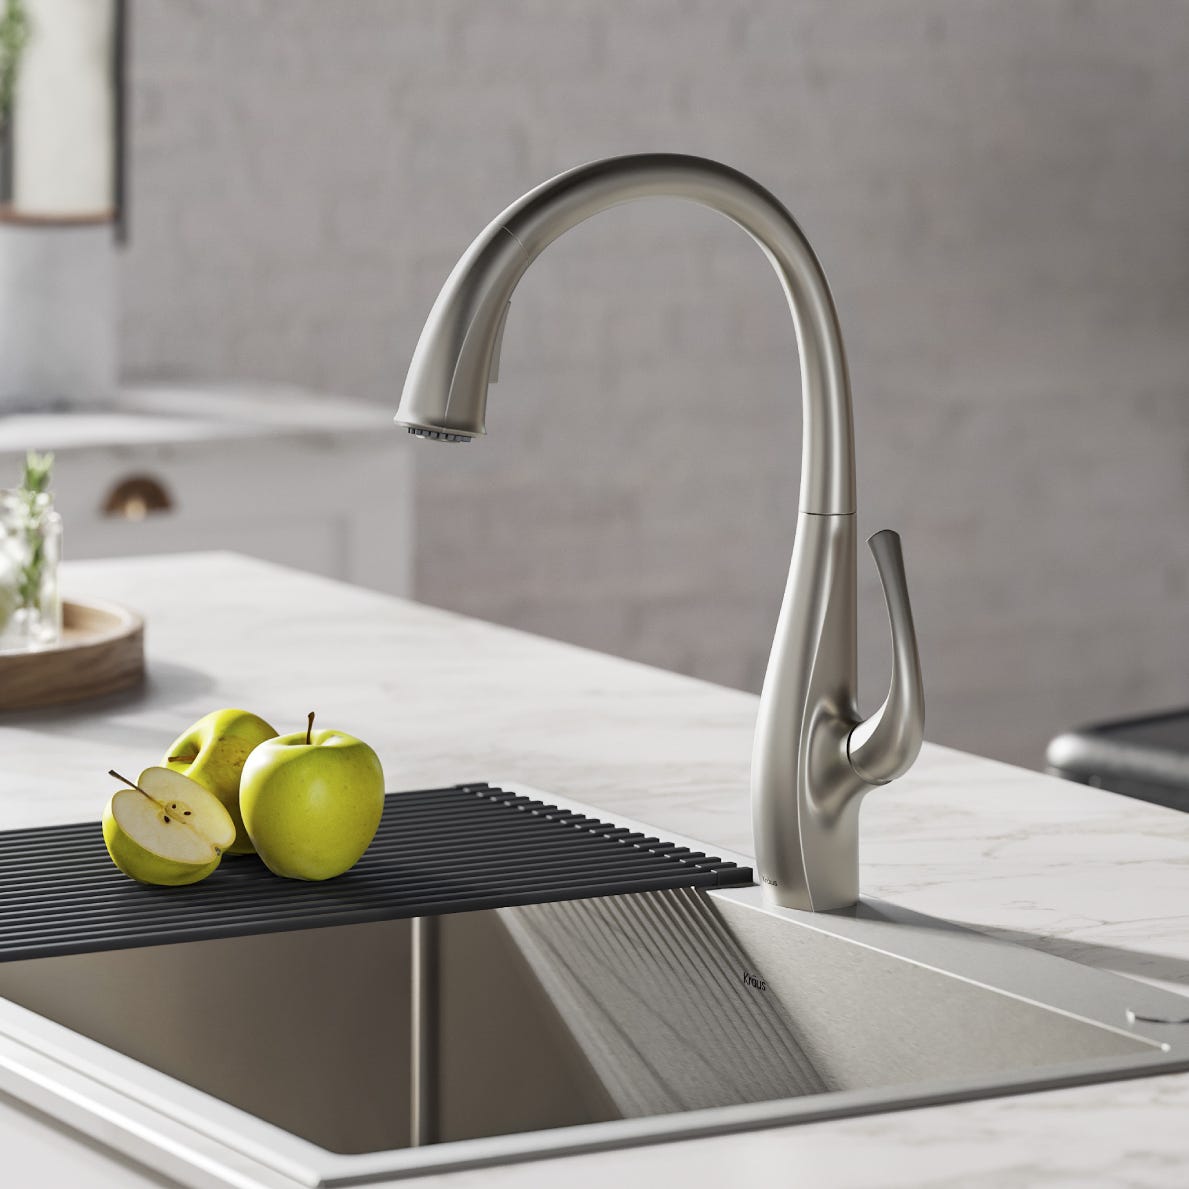 Kitchen-Faucet-Buyer’s-Guide-10